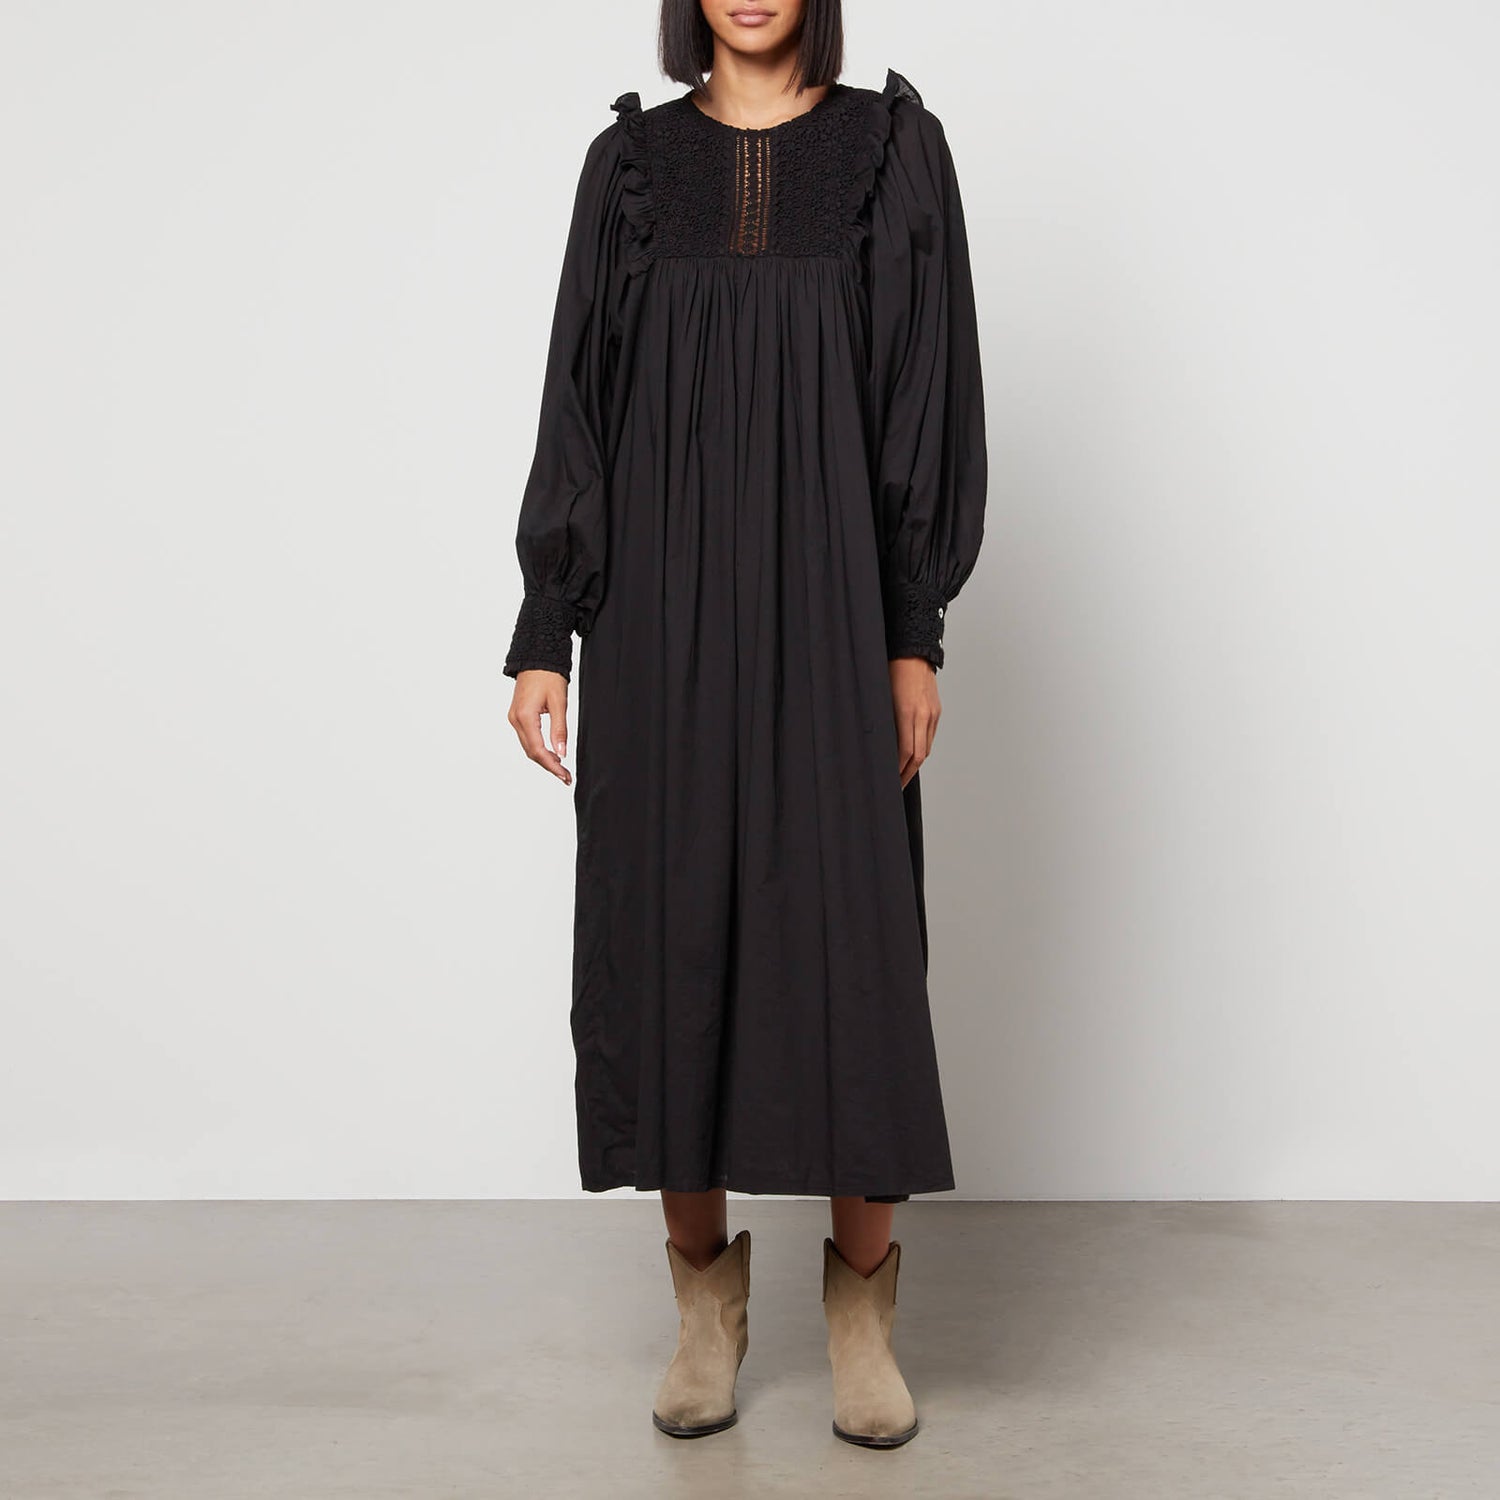 Skall Studio Phoebe Ruffle and Lace-Trimmed Organic Cotton Dress